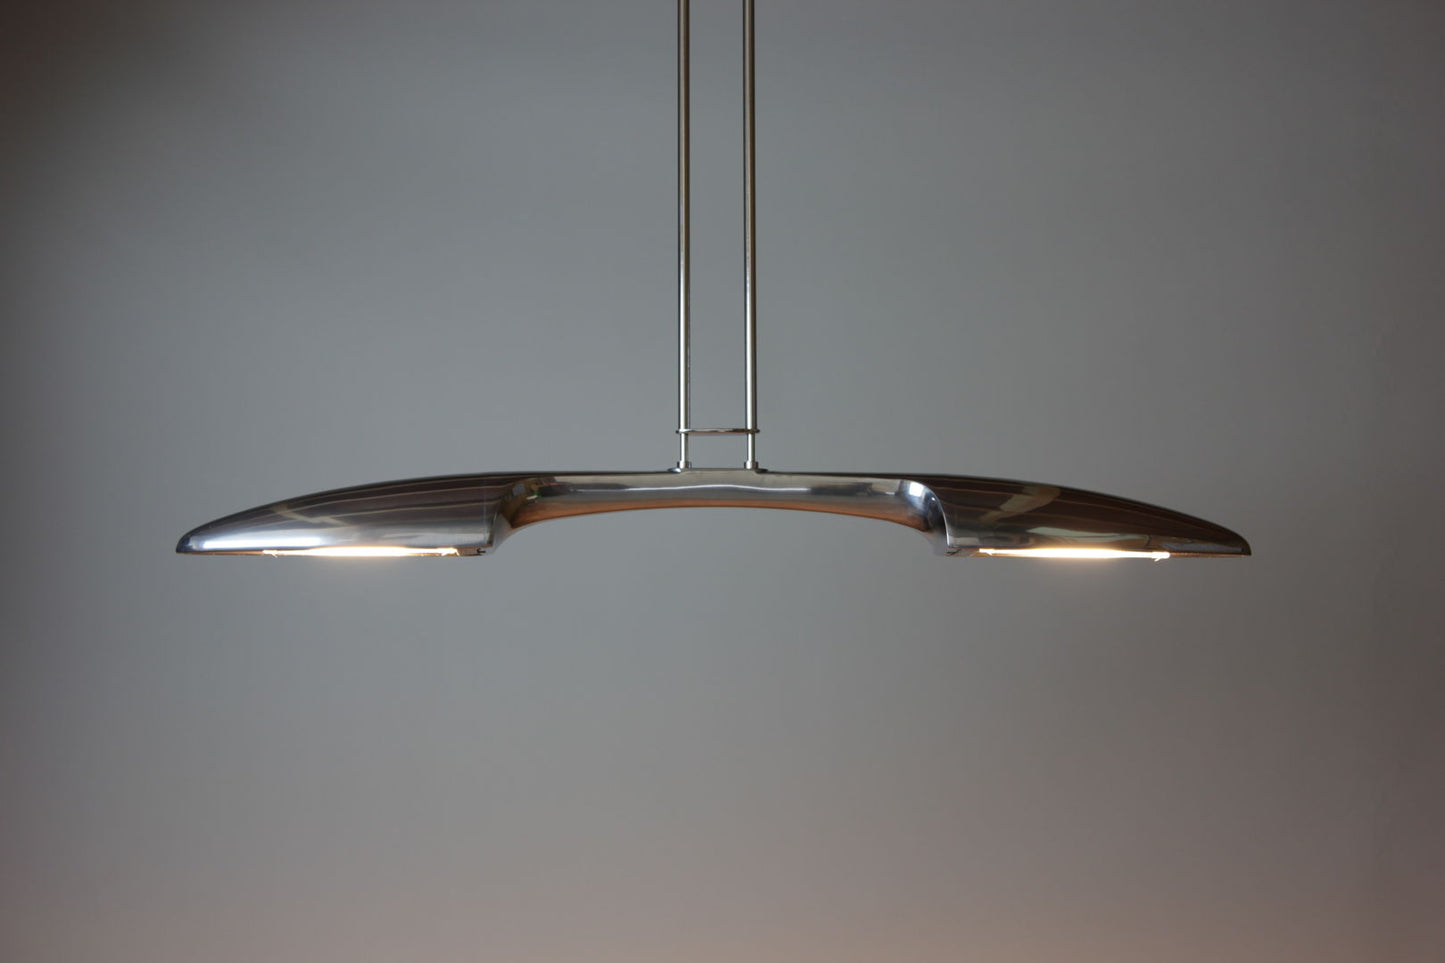 Pendant lamp by Jorge Pensi for B.Lux